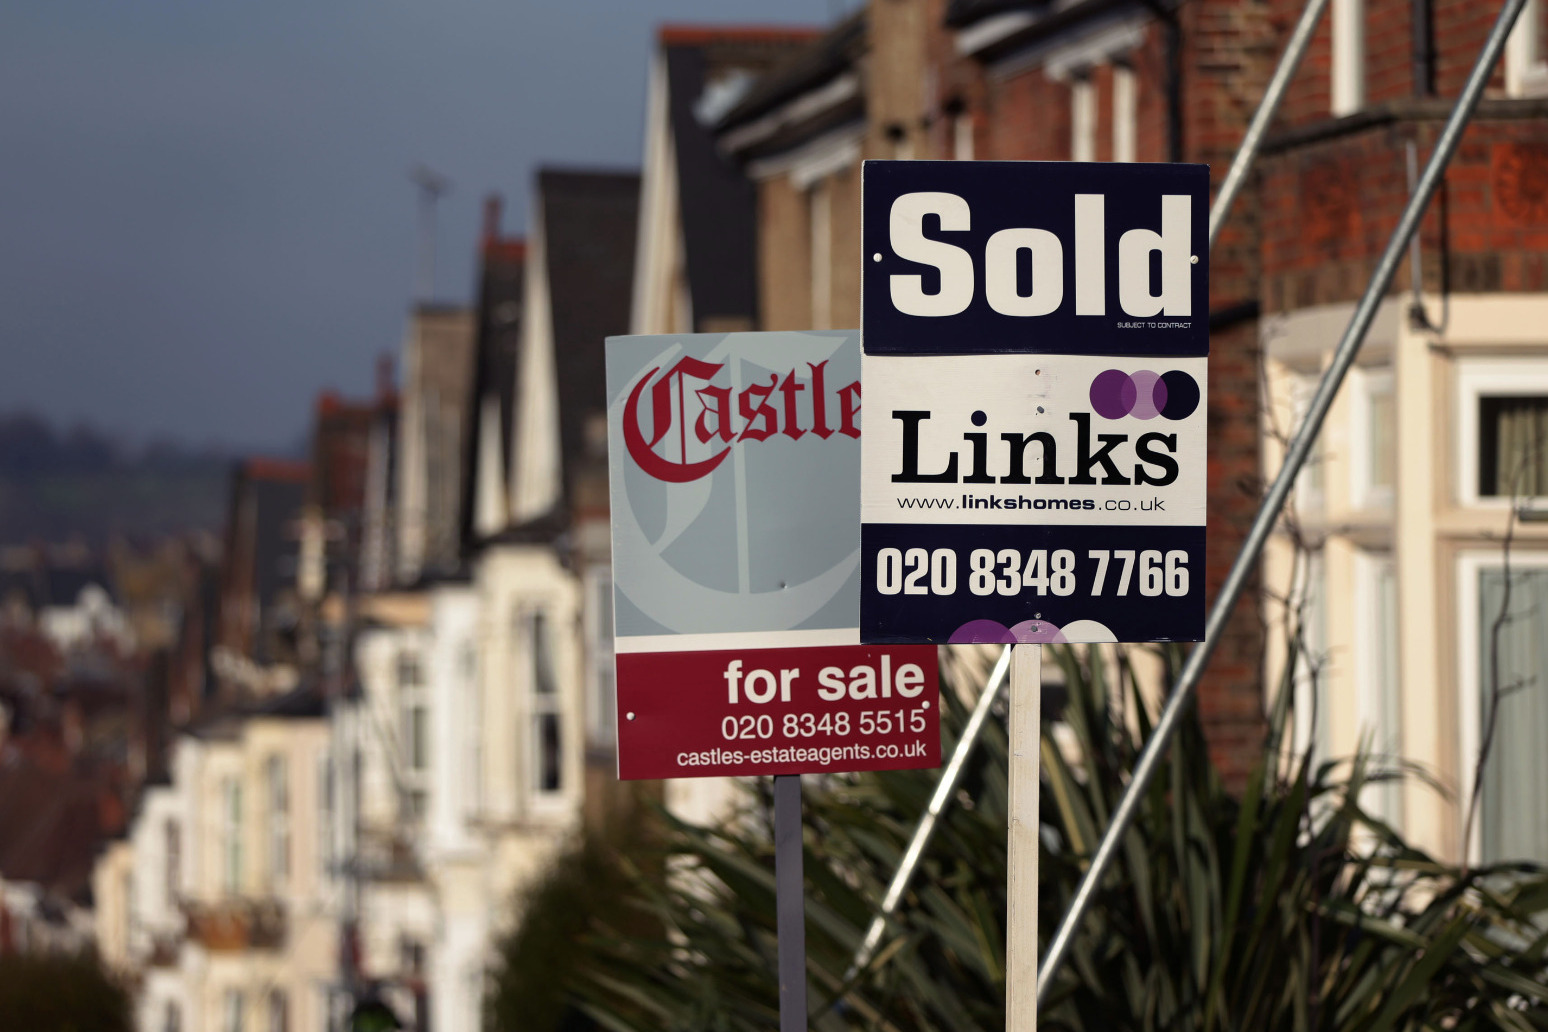 House prices up by 10% annually in November 